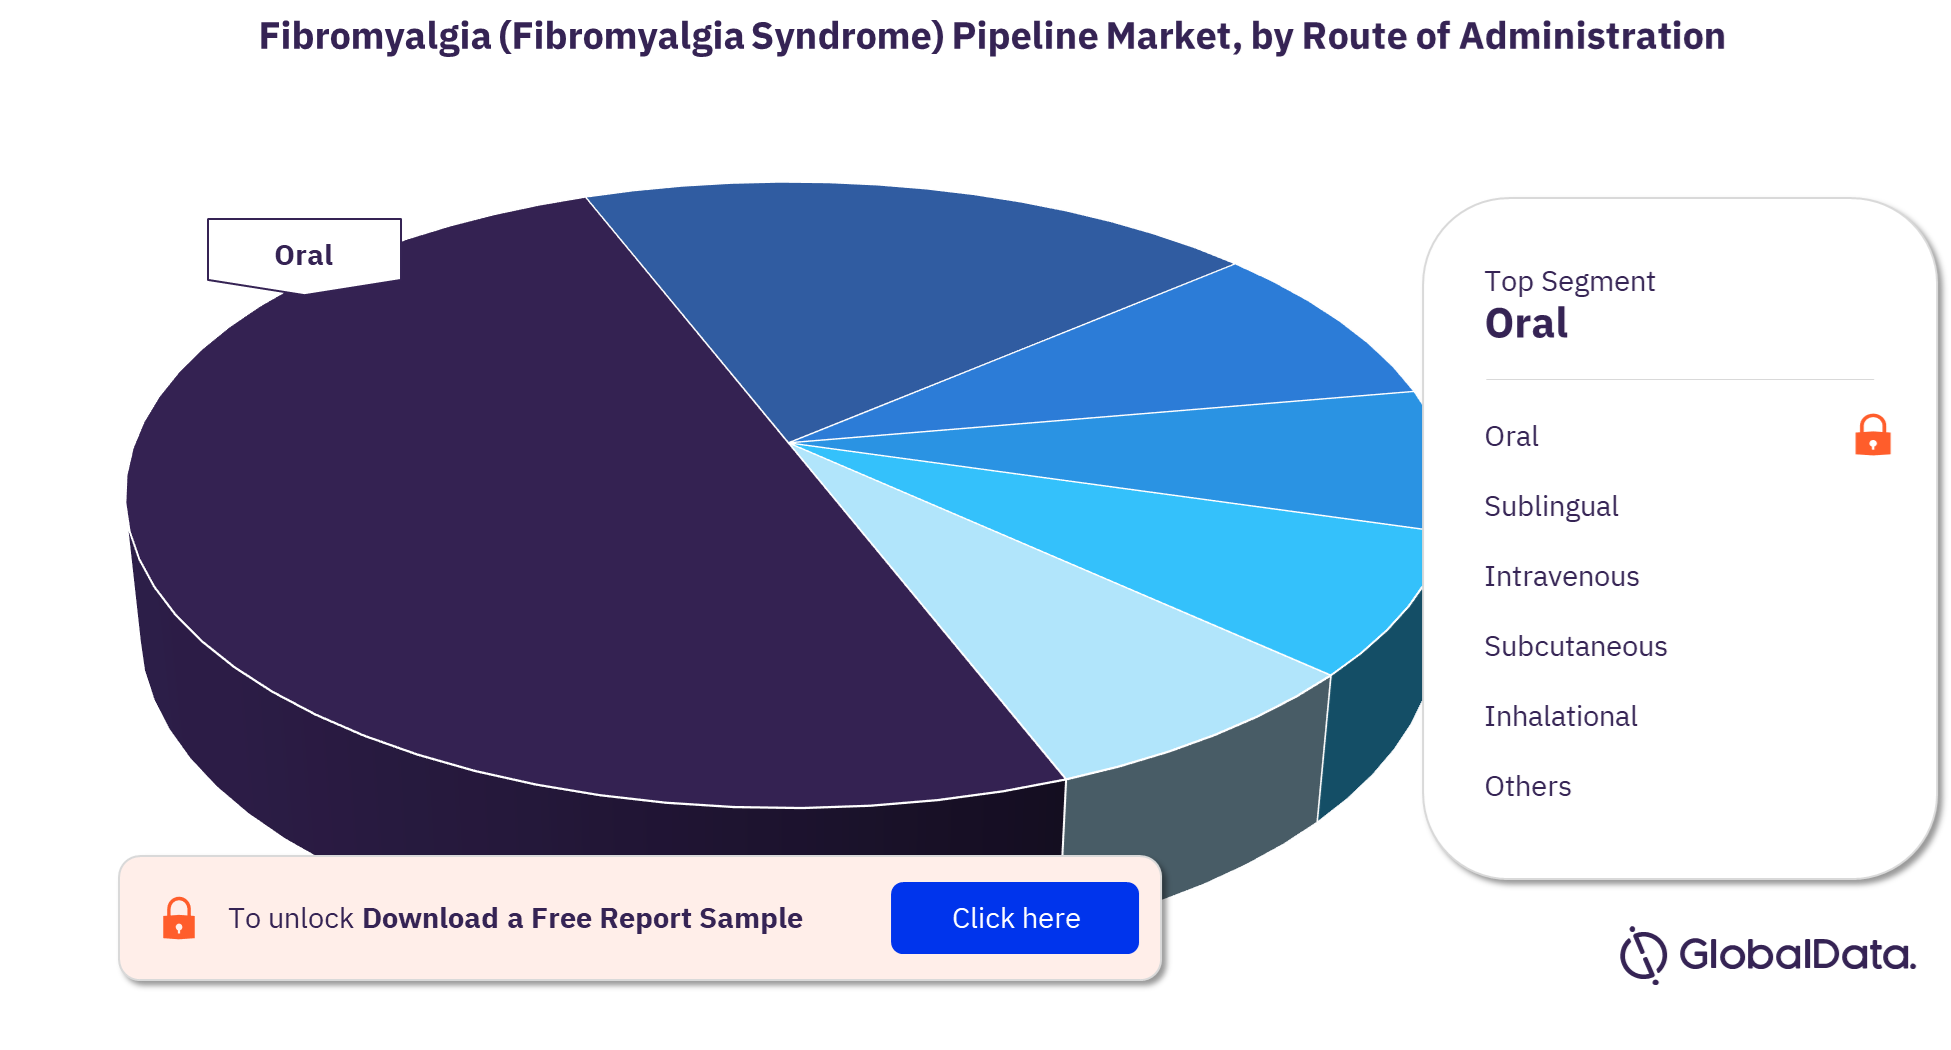 Fibromyalgia pipeline products market, by route of administration